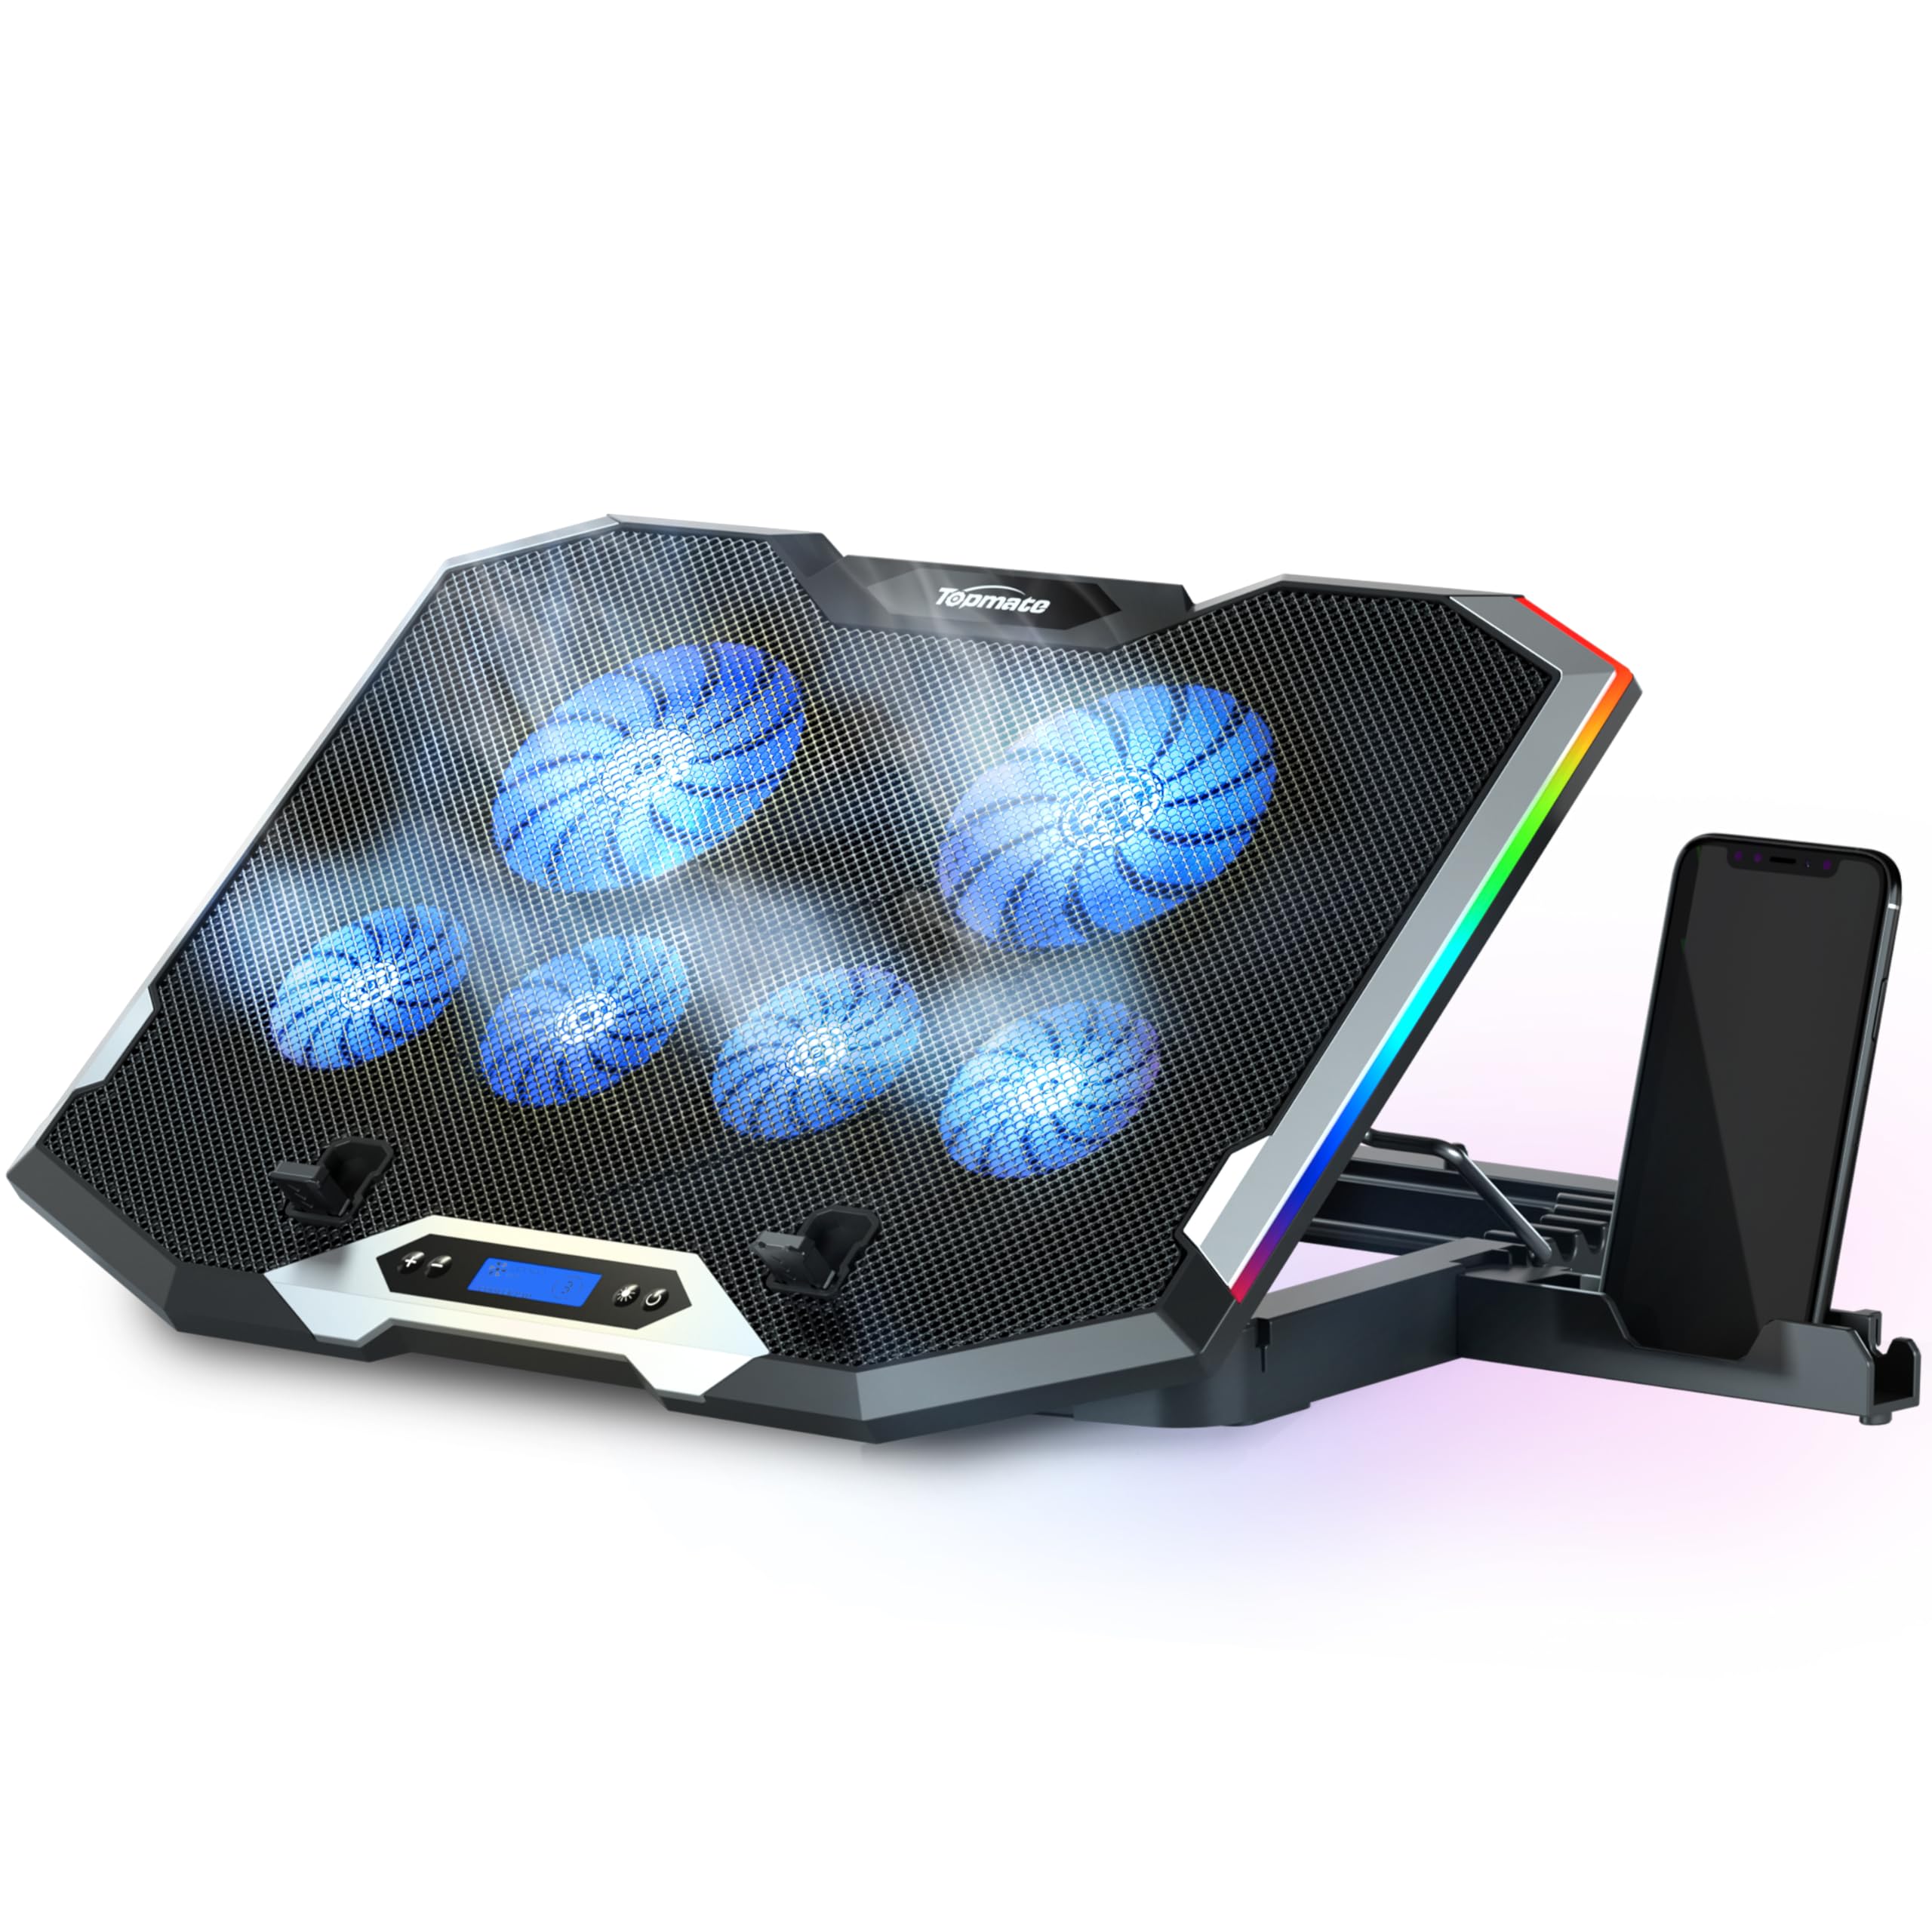 TopMate C11 Laptop Cooling Pad RGB Gaming Notebook Cooler | Laptop Fan Stand Adjustable Height with 6 Quiet Fans and Phone Holder | Computer Chill Mat | for 15.6-17.3 Inch Laptops - Blue LED Light